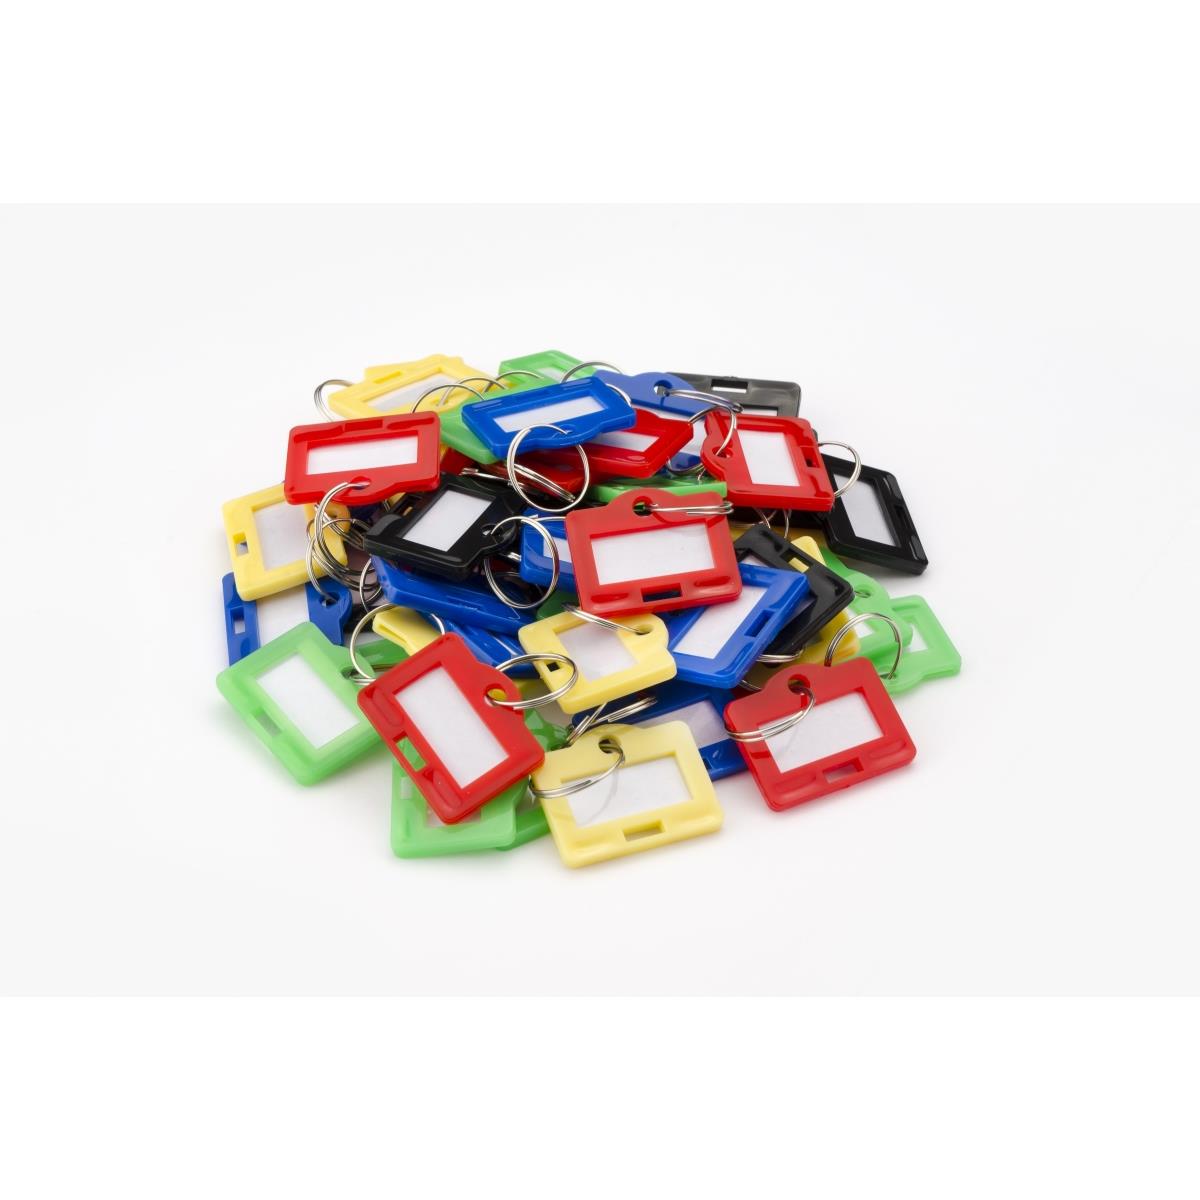 Af12836 Small Assorted Key Tags For Key Cabinets - Multicolor, Pack Of 50